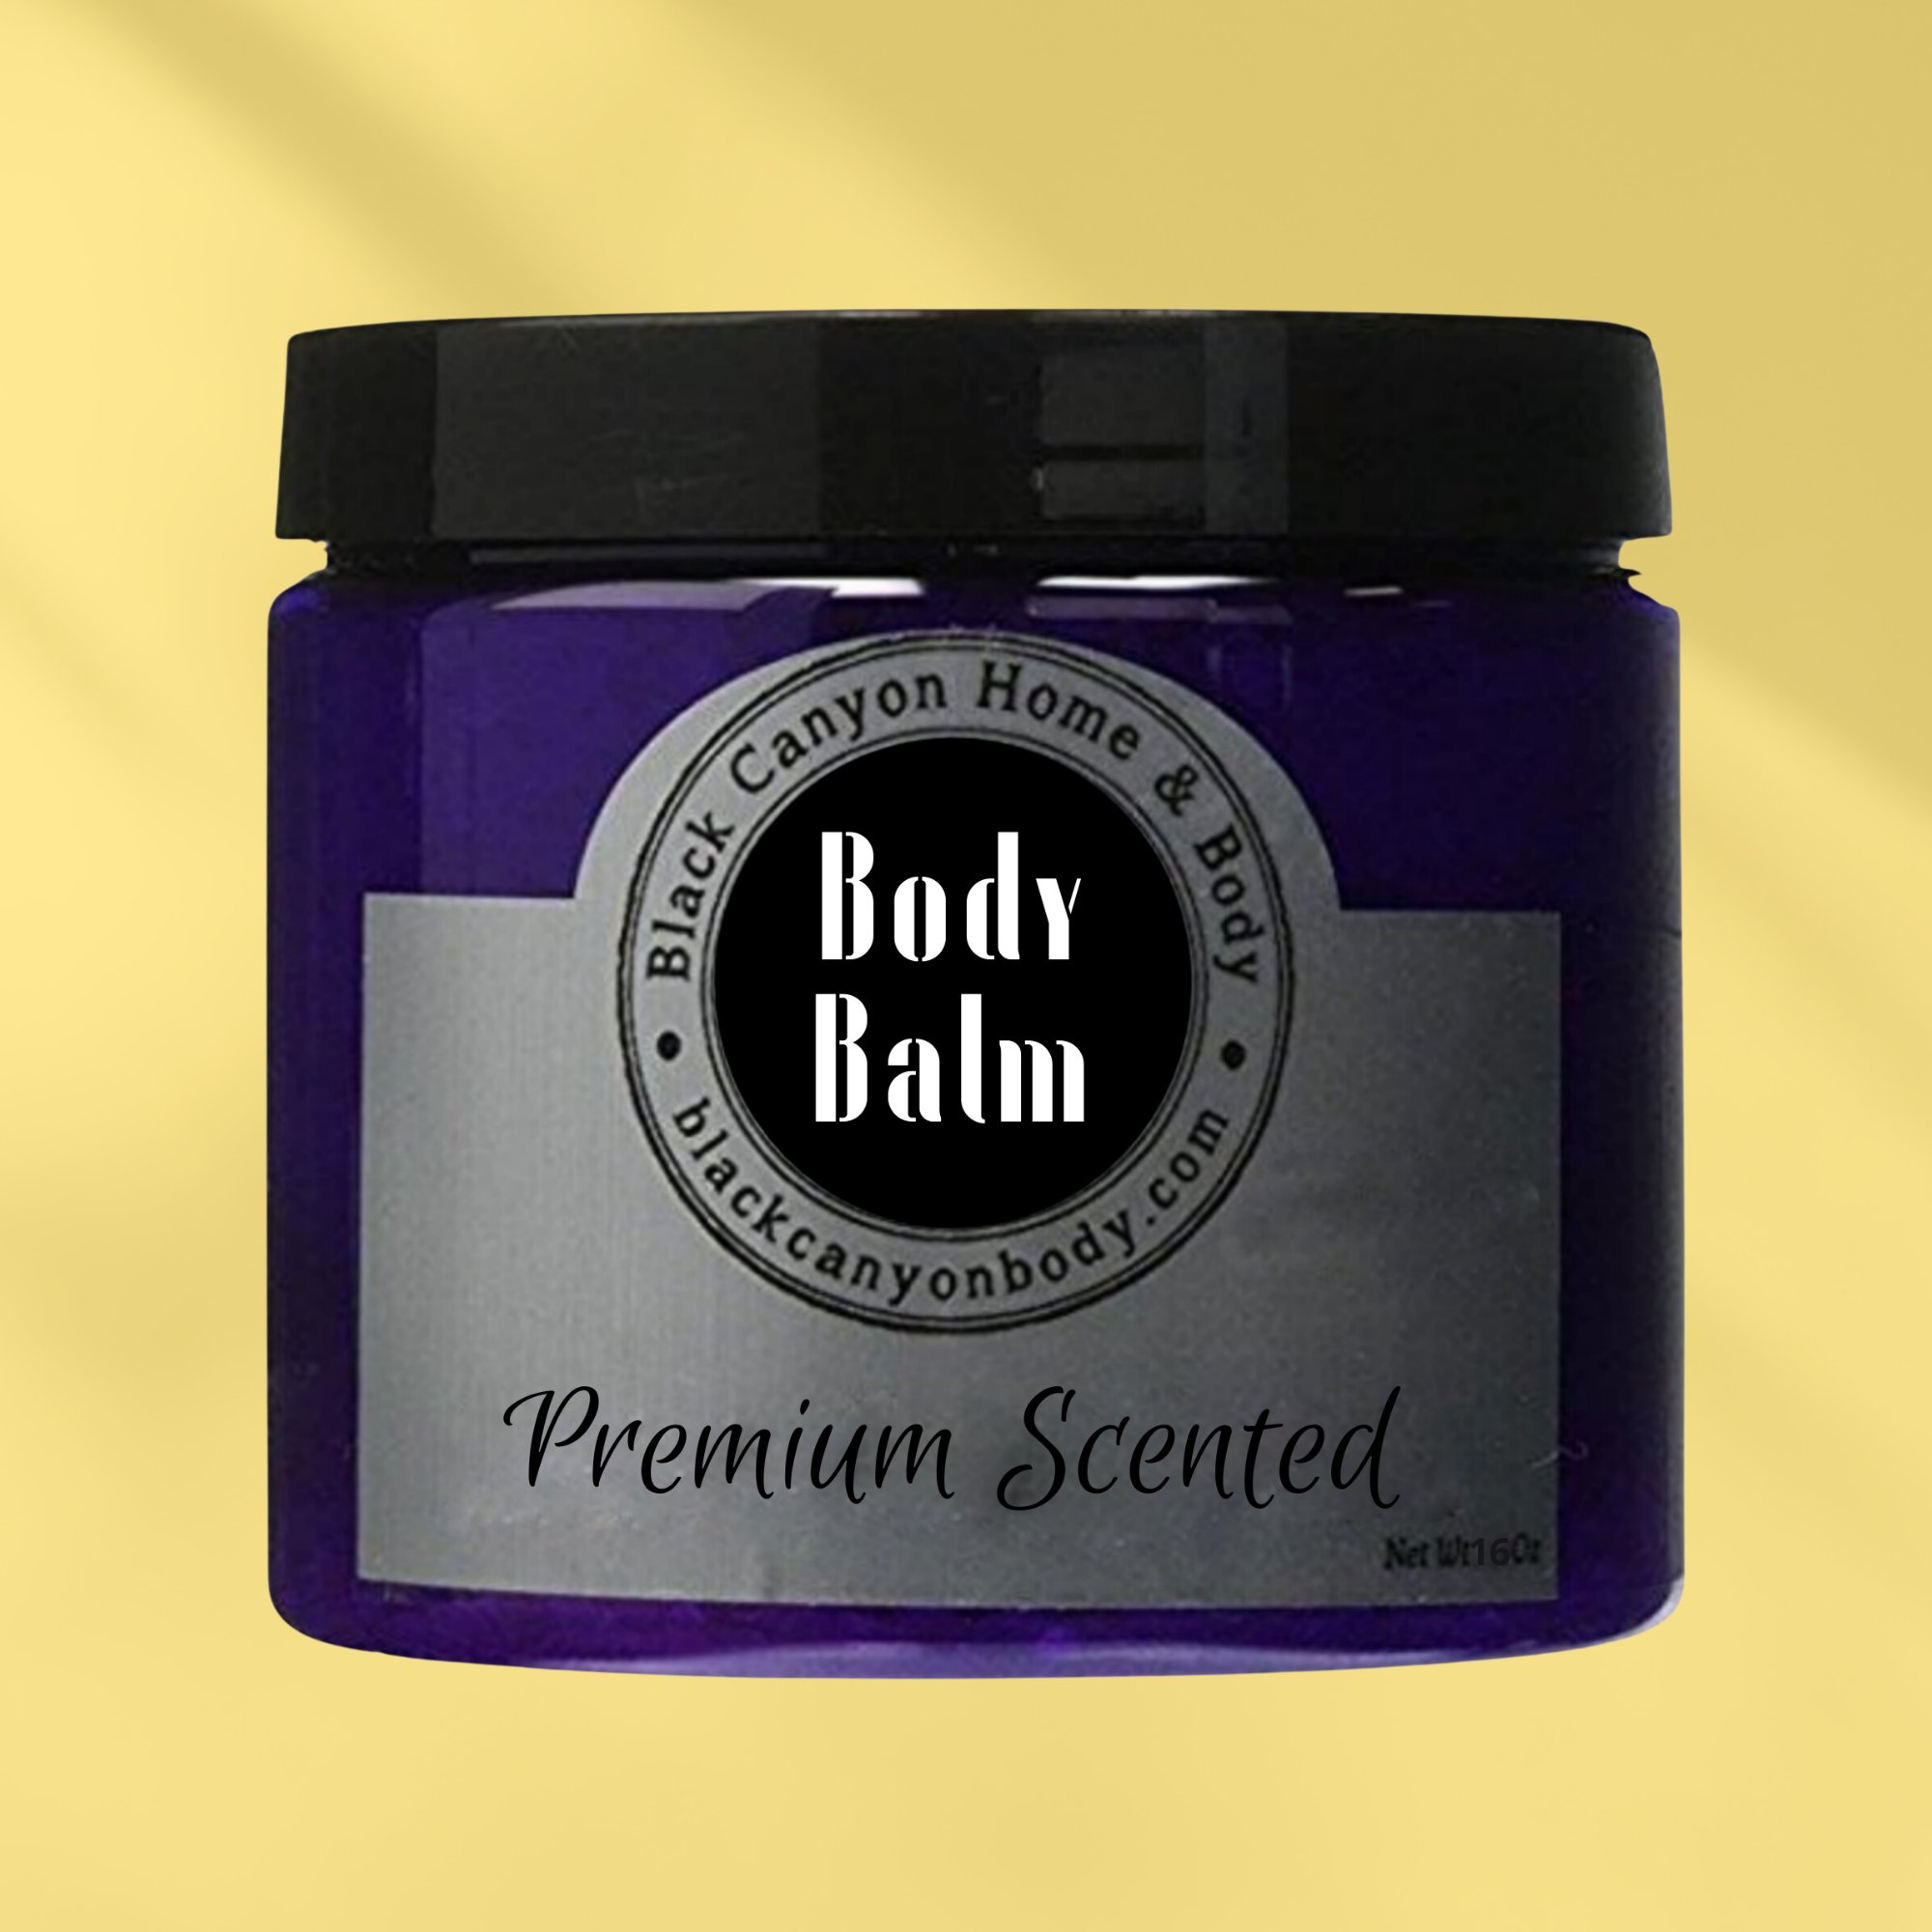 Paydens Cobalt Chocolate Temptation Scented Natural Body Balm with Shea For Men